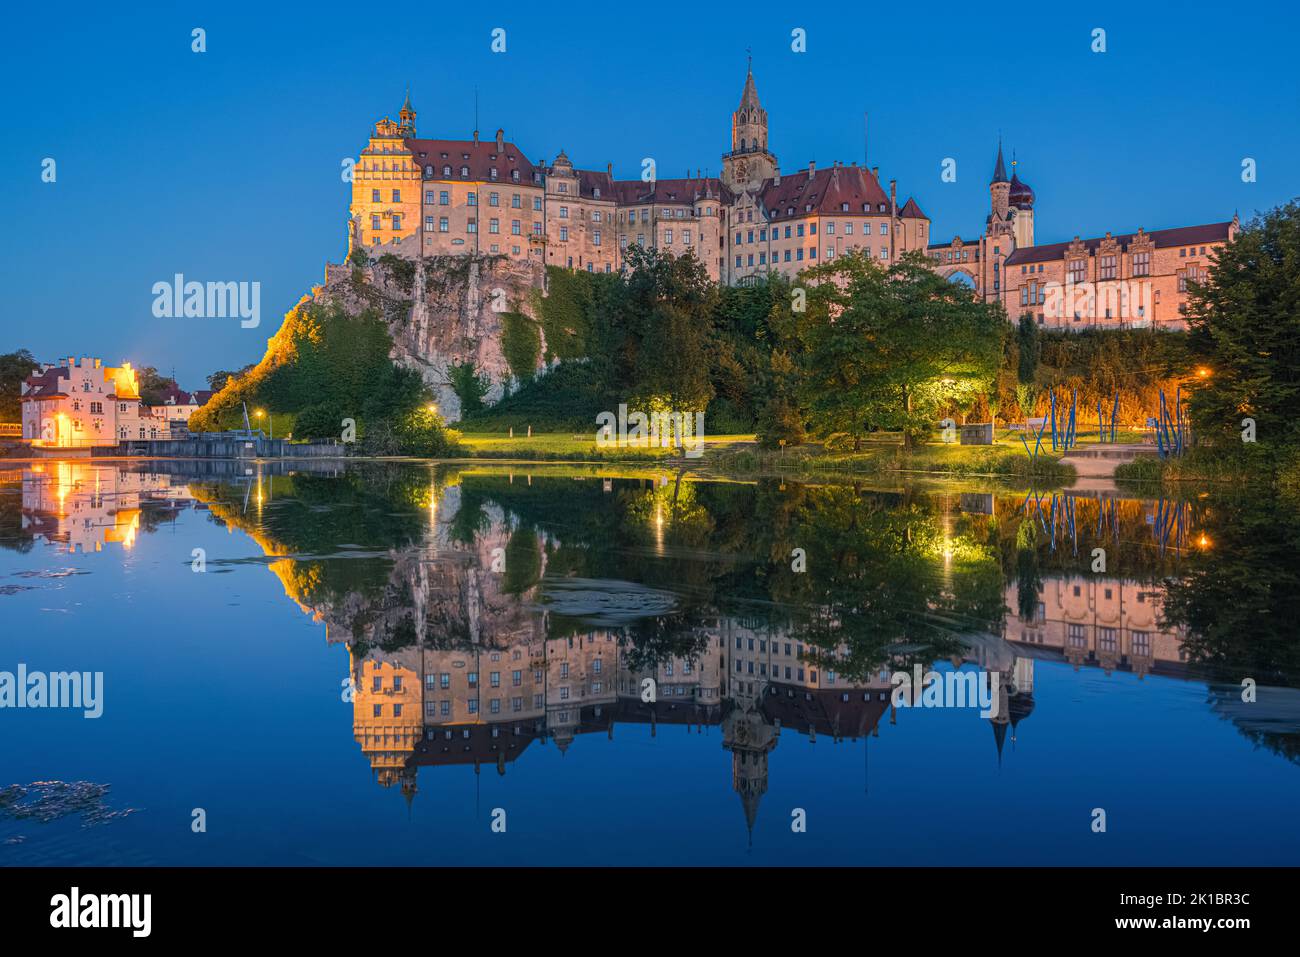 Sigmaringen Castle was the princely castle and seat of government for the Princes of Hohenzollern-Sigmaringen. Situated in the Swabian Alb region of B Stock Photo